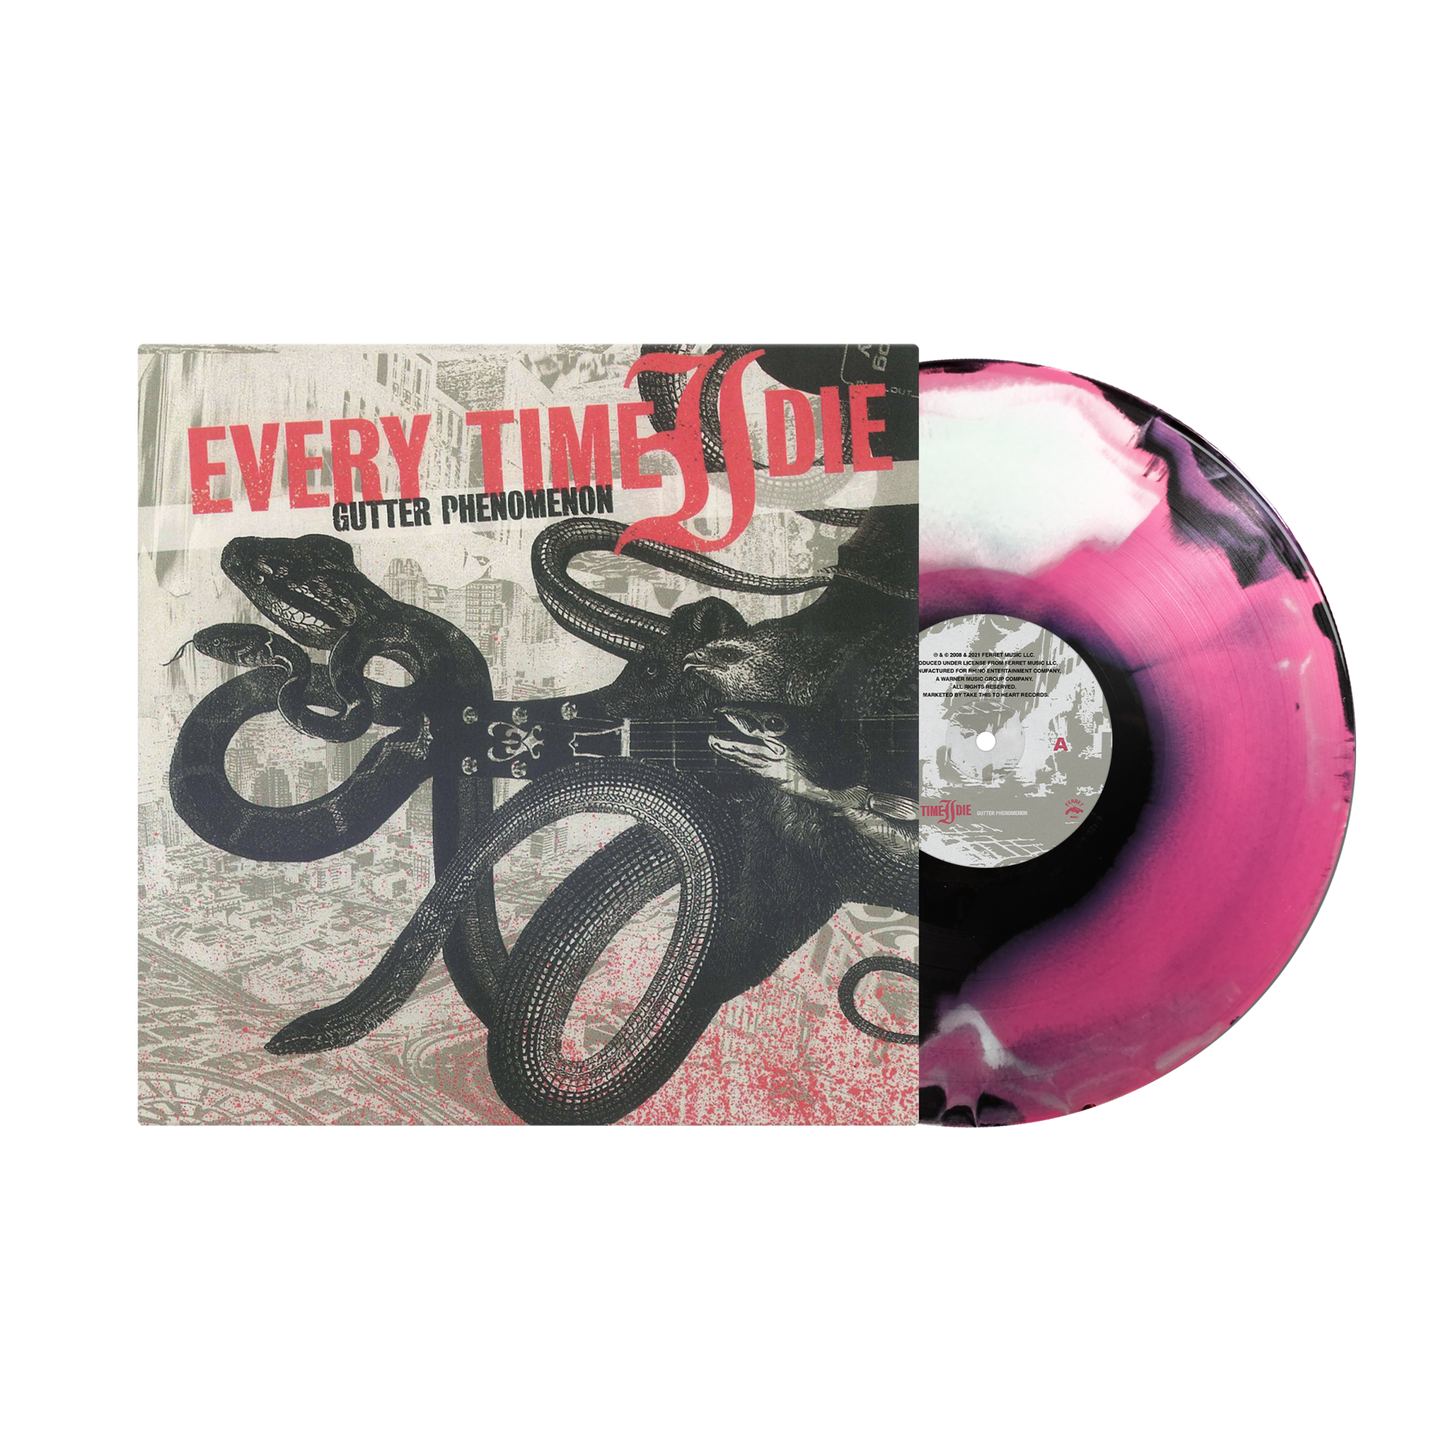 Every Time I Die - "Gutter Phenomenon"